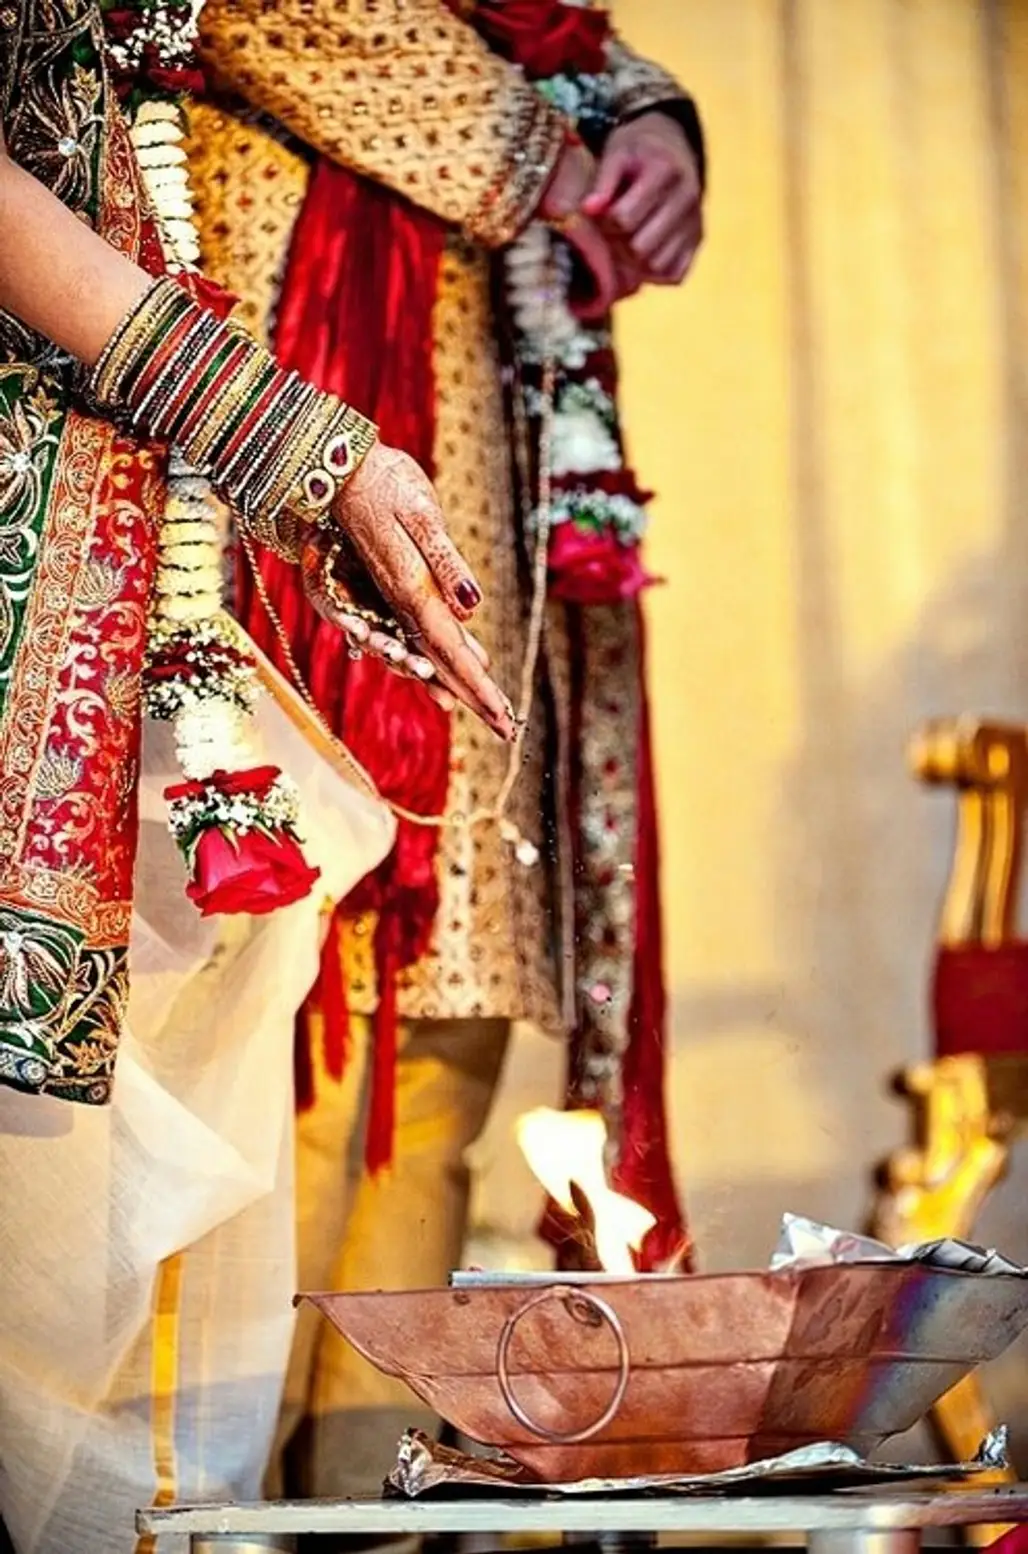 Read up on the Wedding Rituals